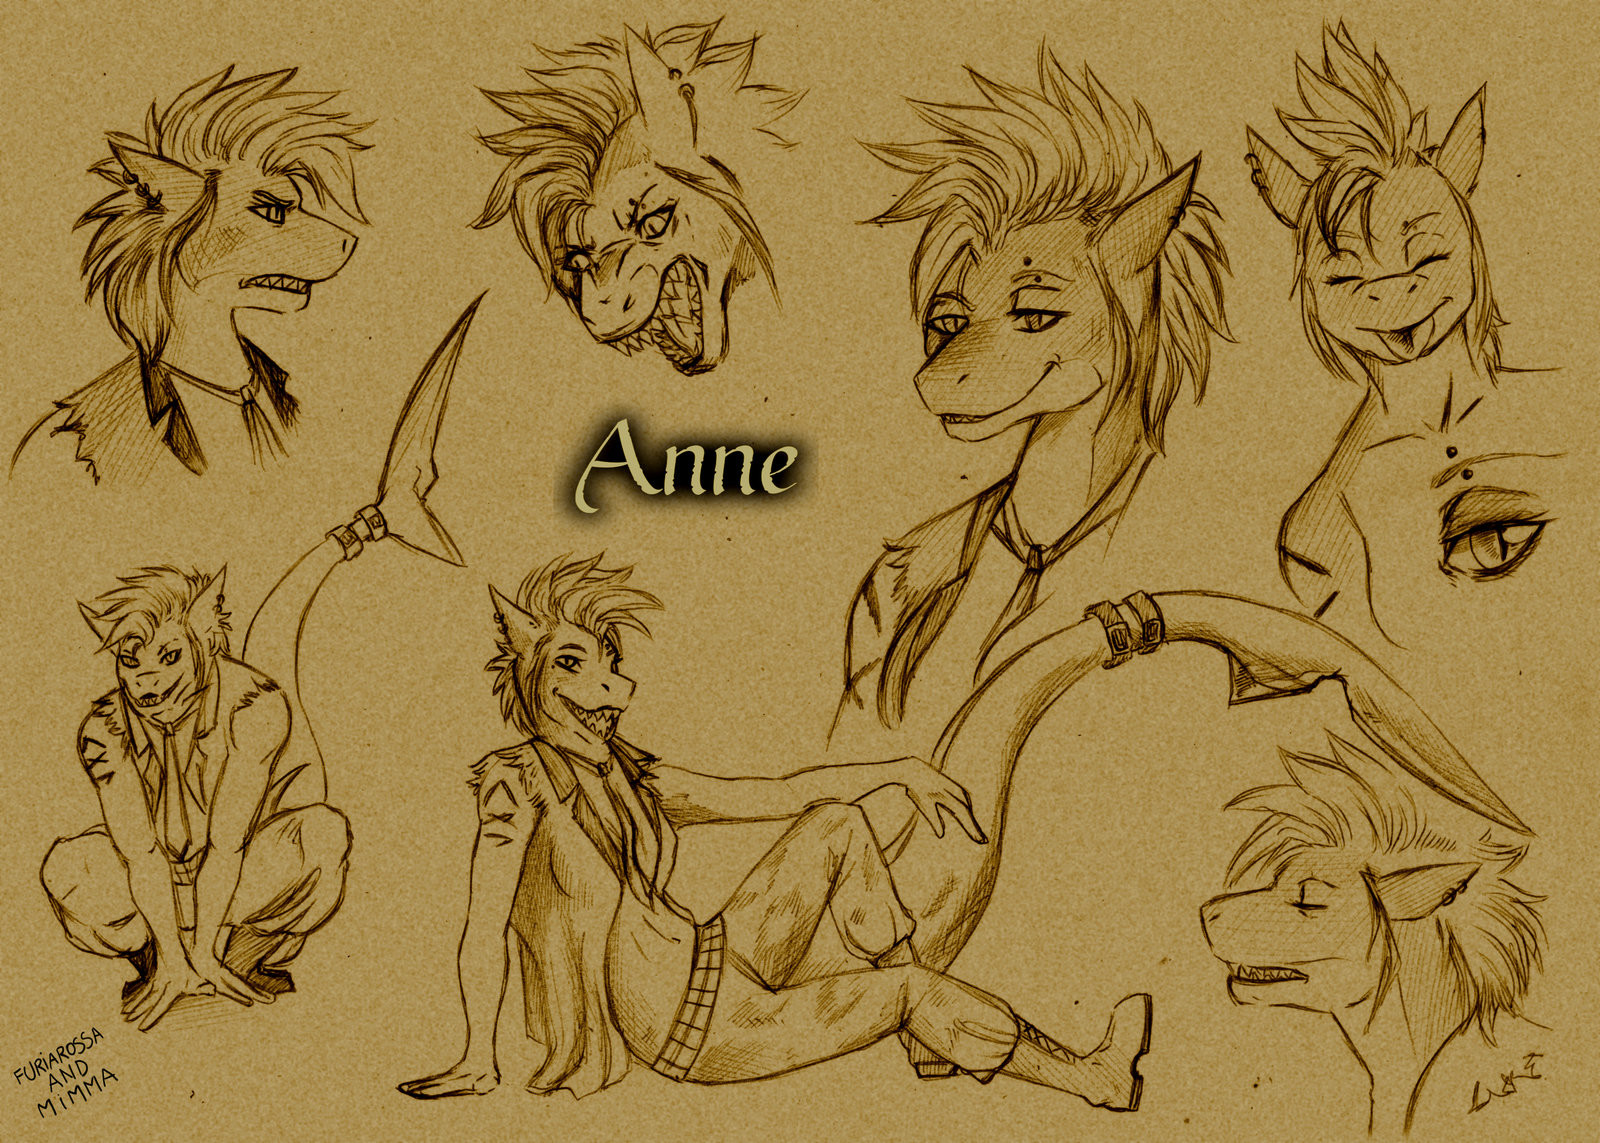 Study on the character of Anne the shark, commission for Thalane.Dragonness